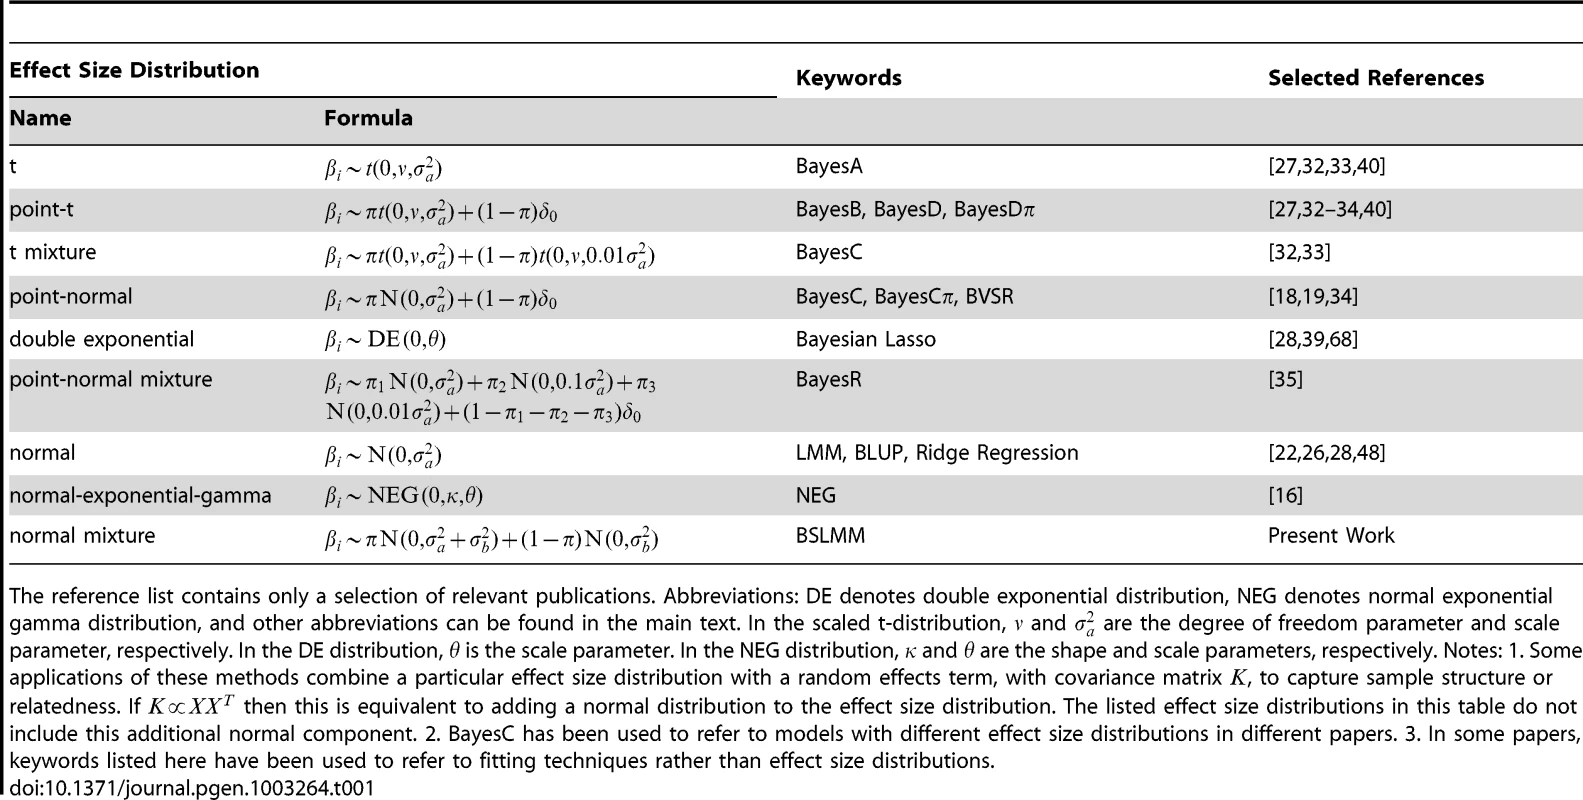 Summary of some effect size distributions that have been proposed for polygenic modeling.